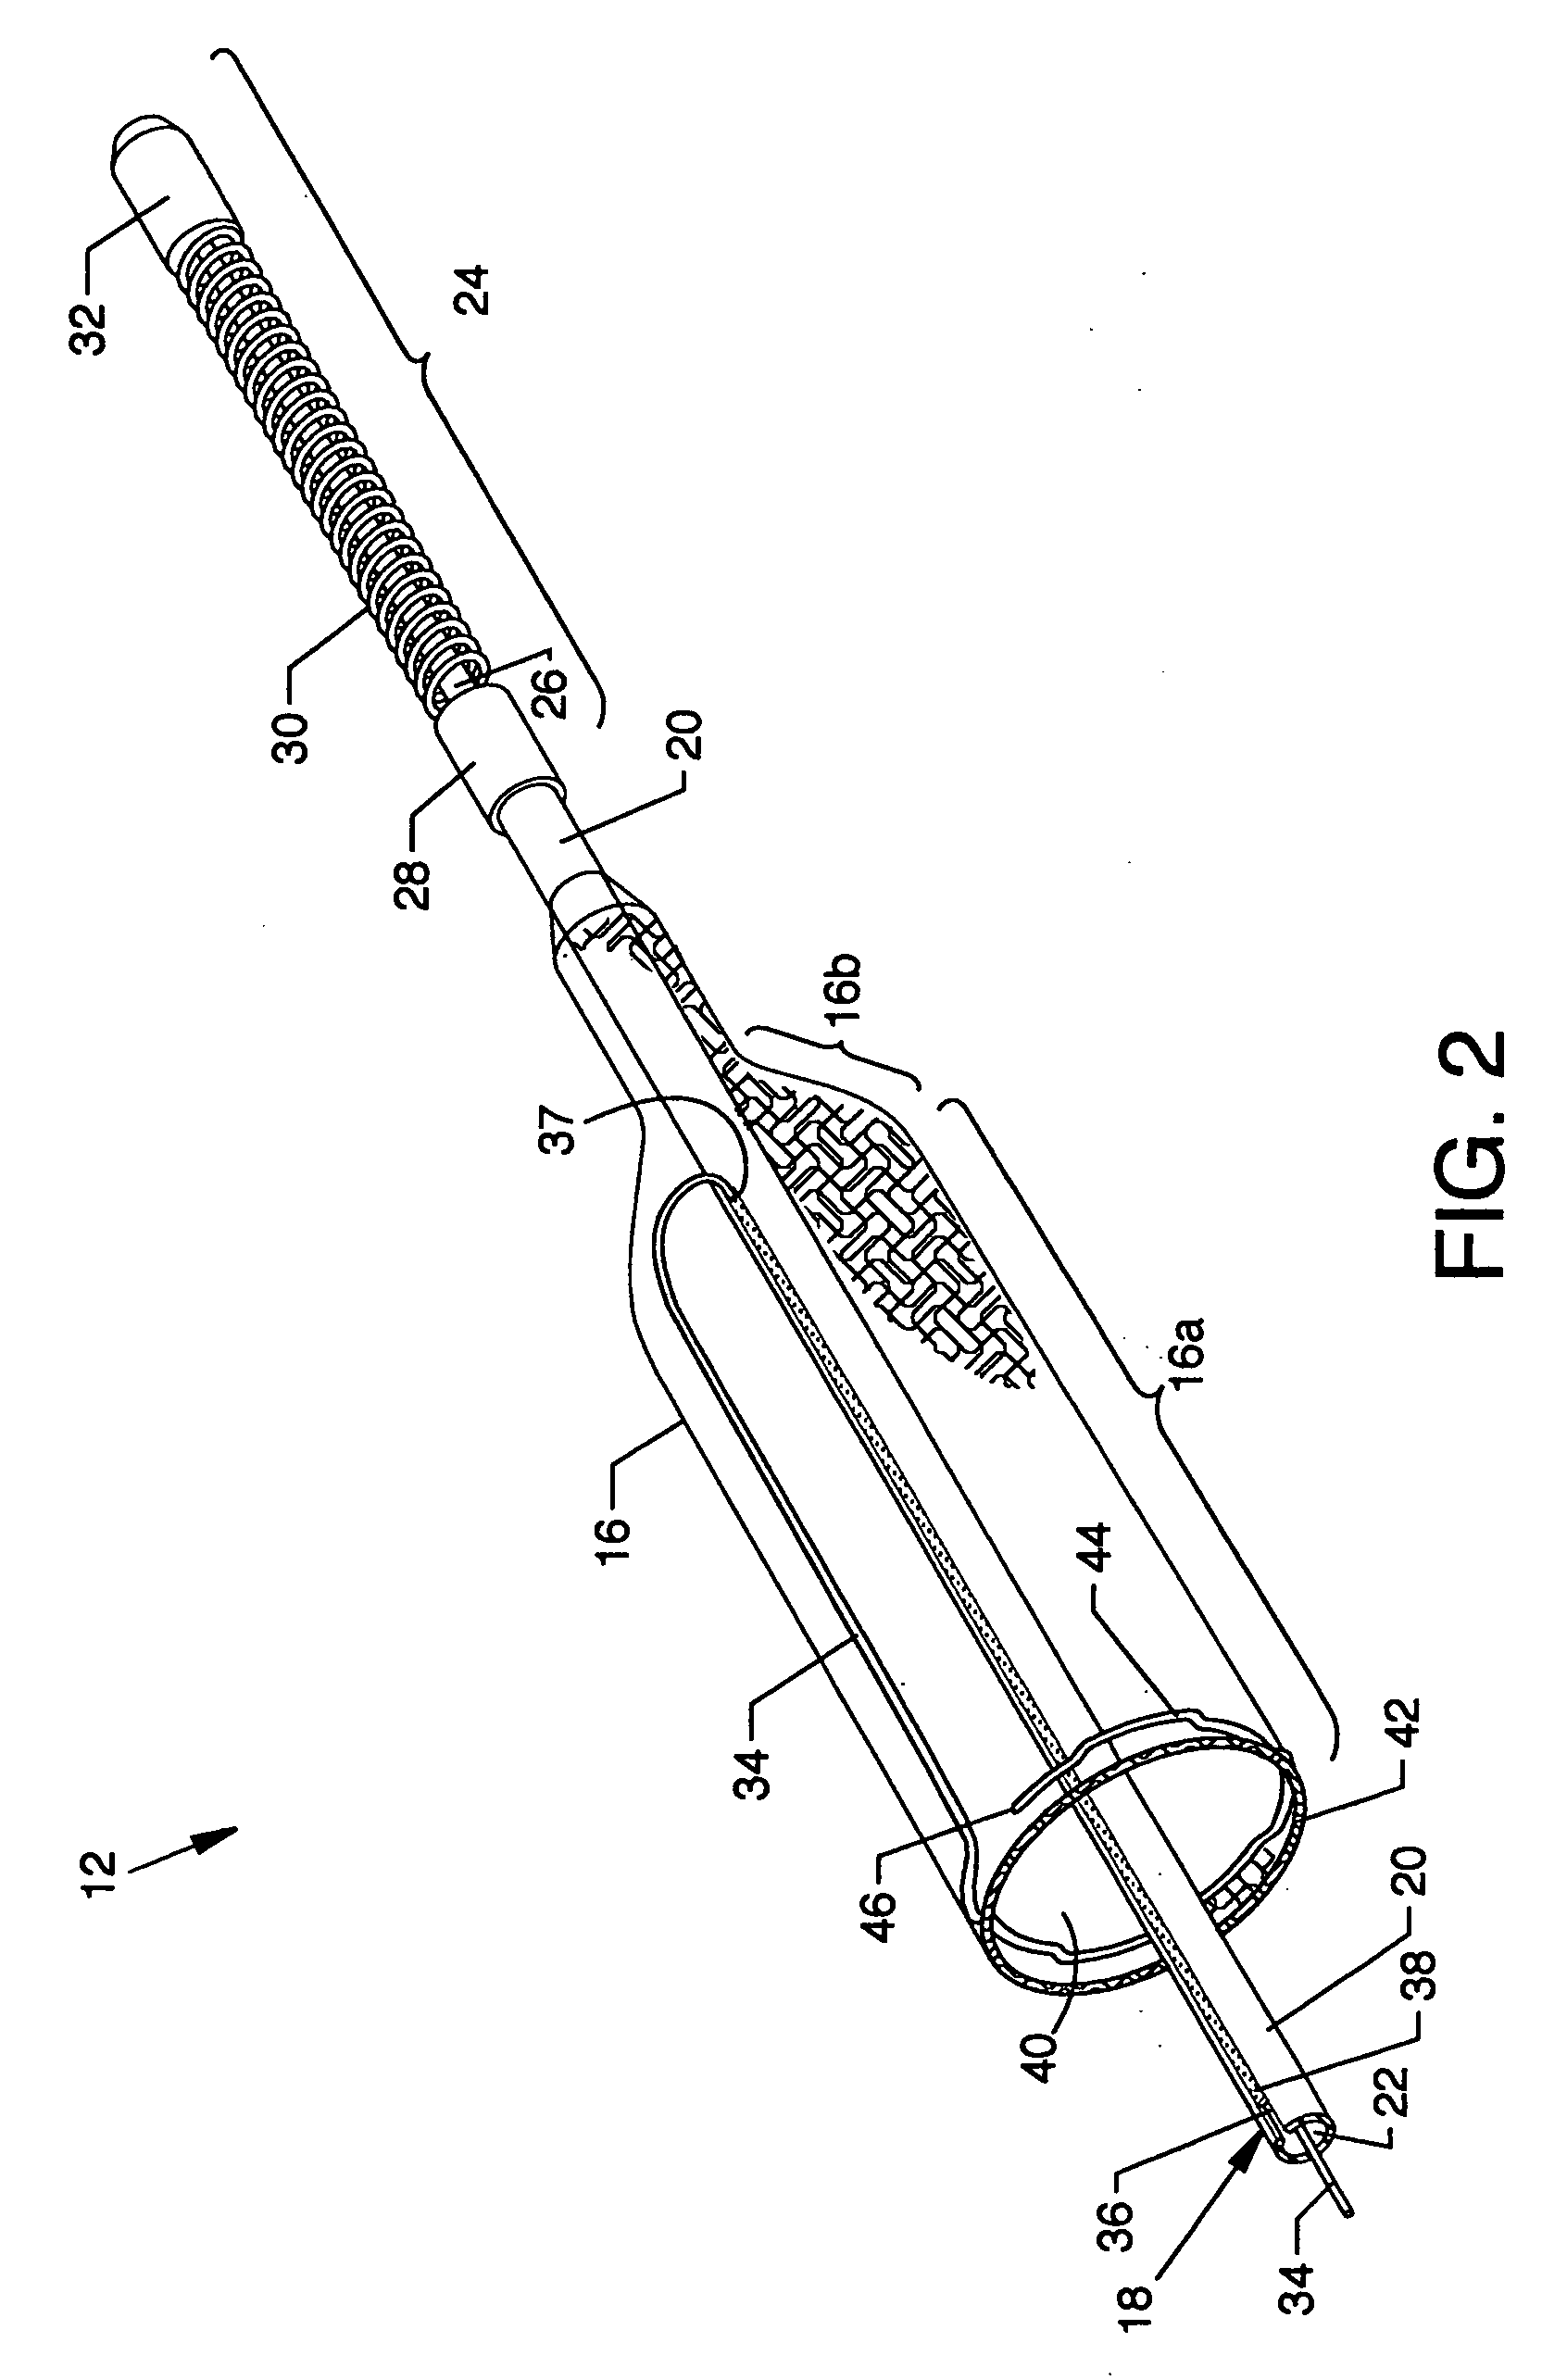 Guidewire with collapsible filter system and method of use